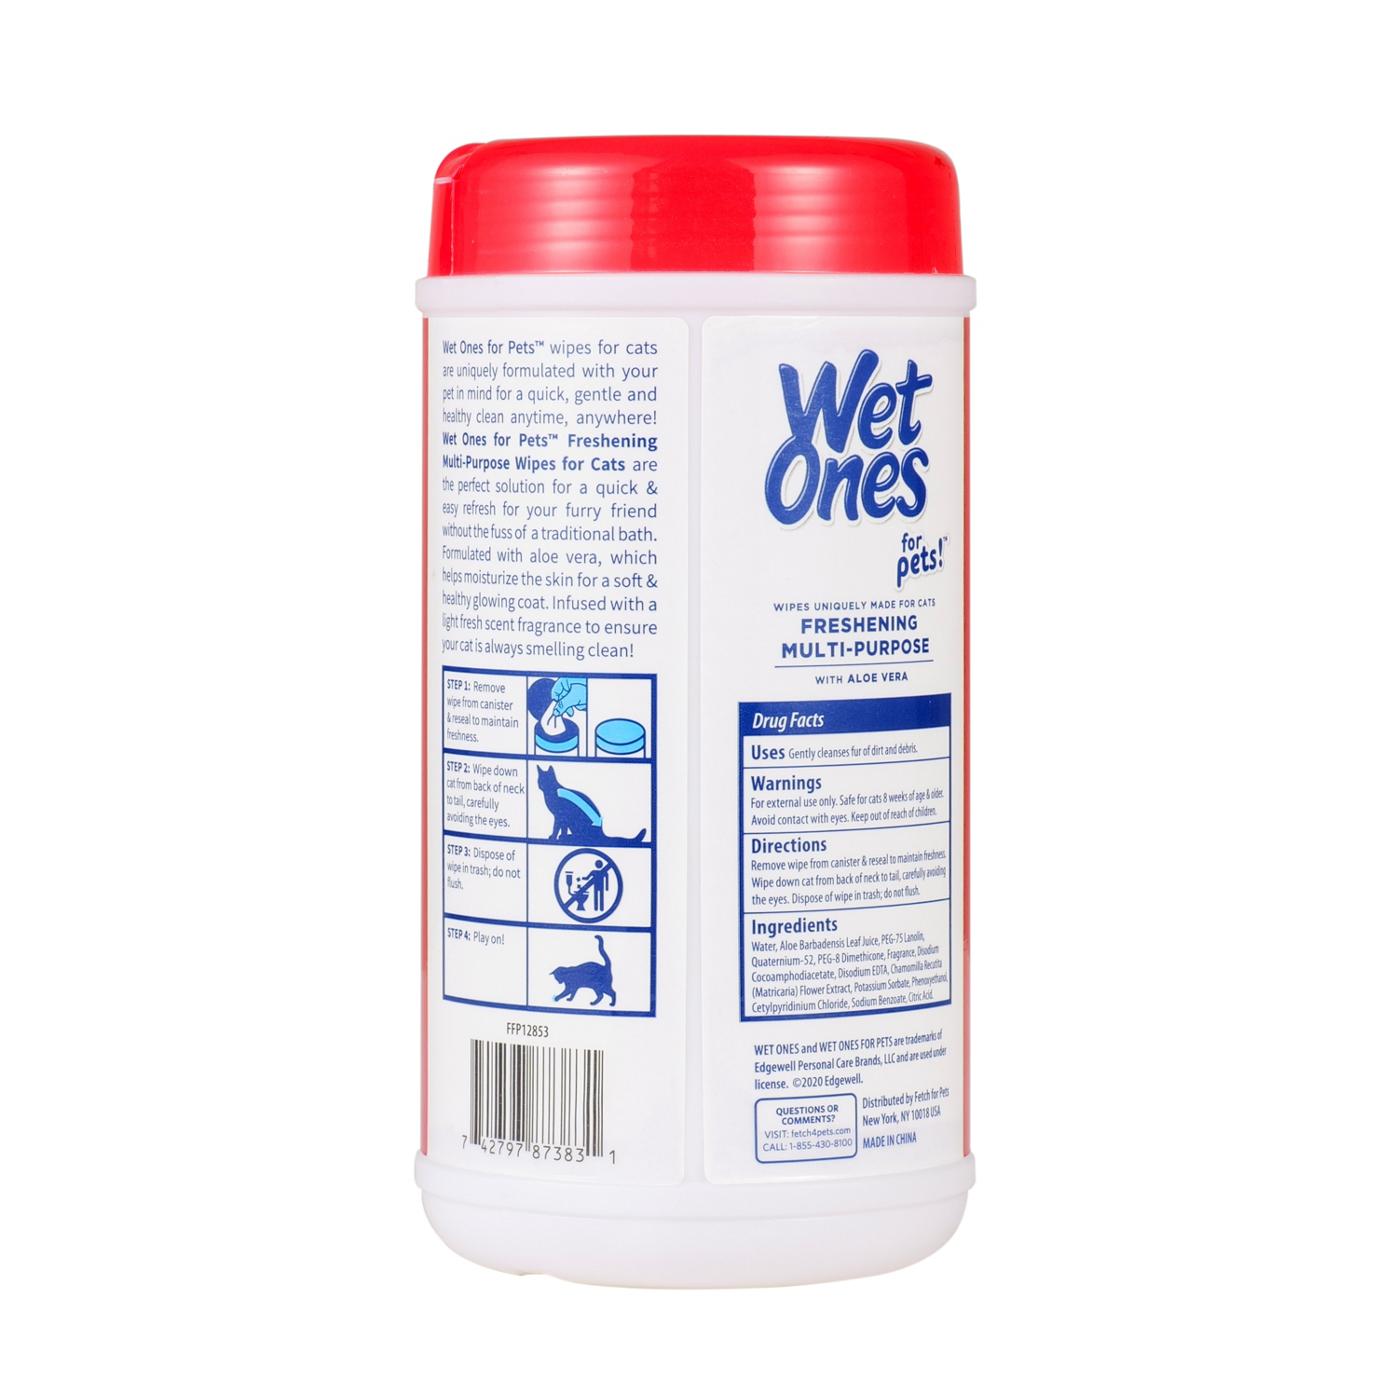 Wet Ones Freshening Multi-Purpose Wipes for Pets; image 2 of 2